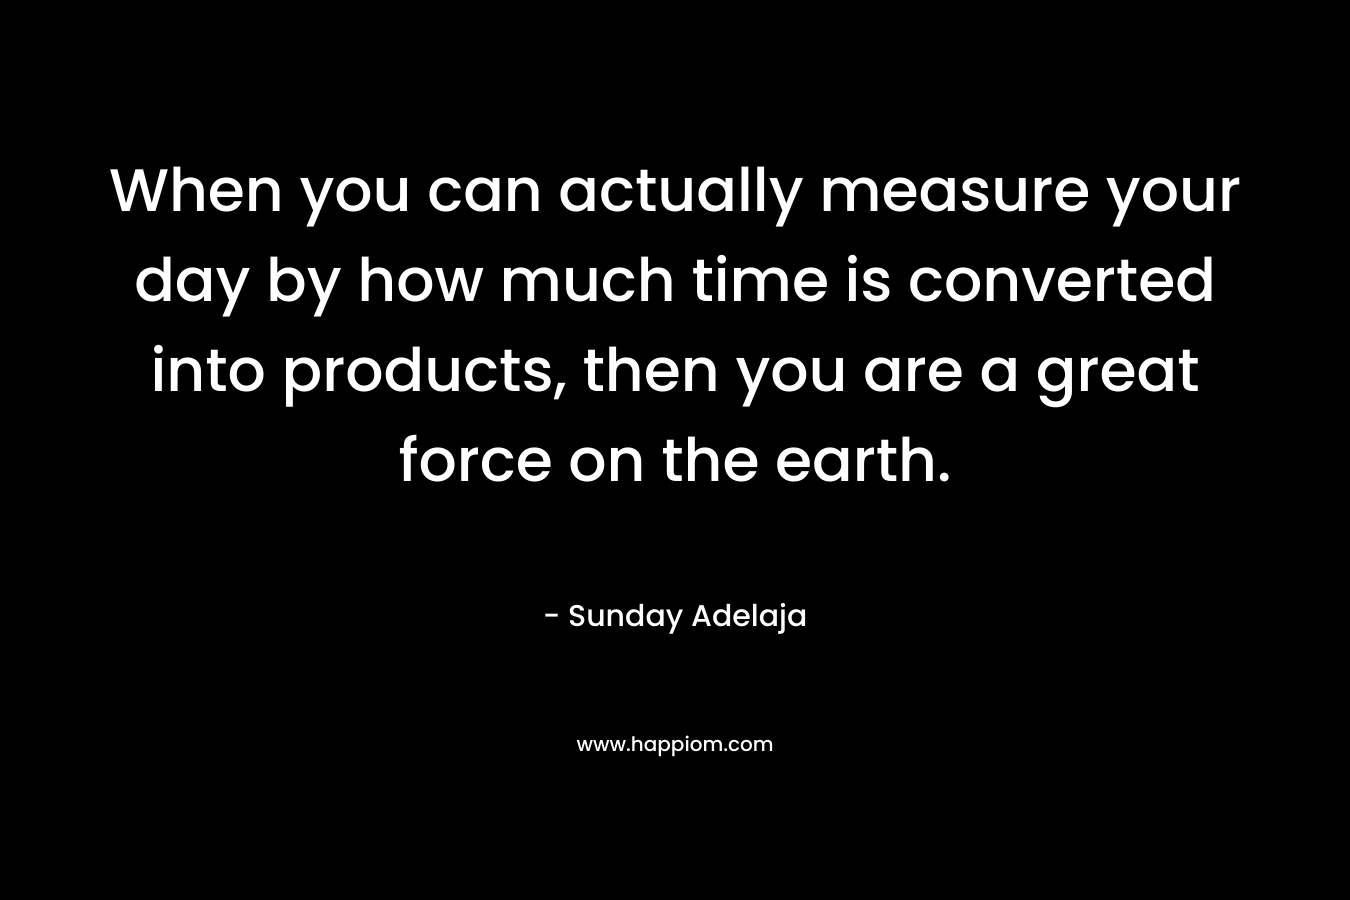 When you can actually measure your day by how much time is converted into products, then you are a great force on the earth.